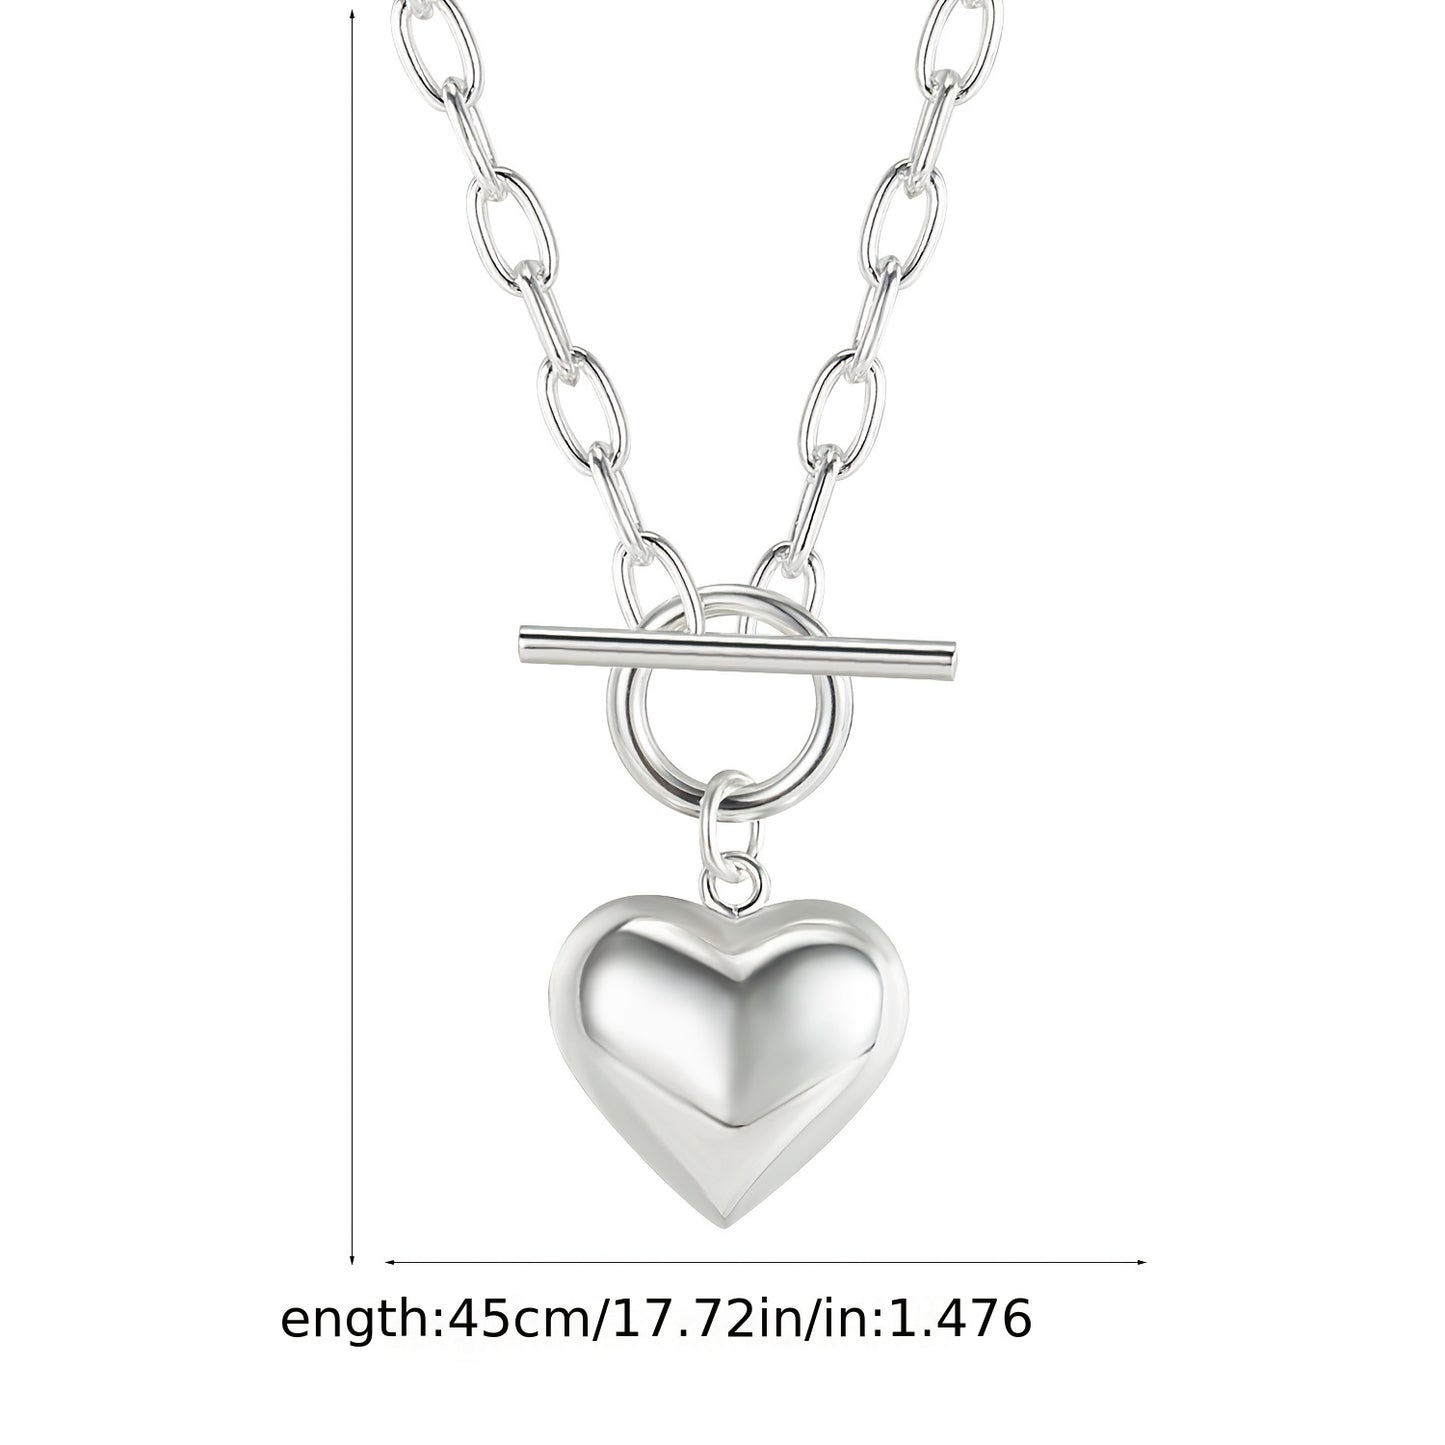 Retro 925 Sterling Silver Heart Necklace With OT Buckle Simple Clavicle Chain Silver Color Necklace